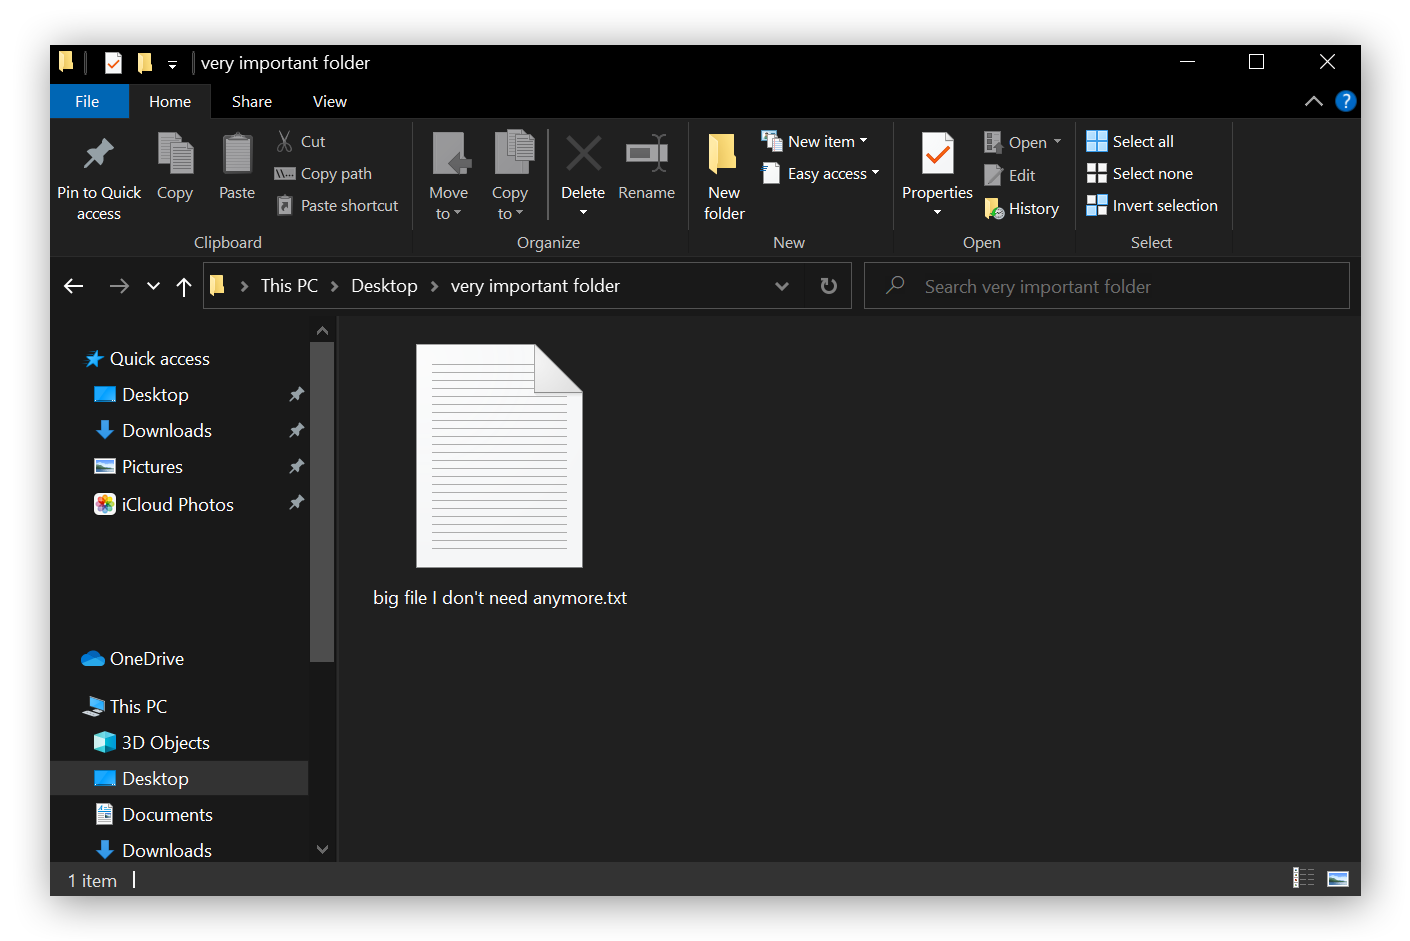 An image of a file seen in File Explorer.